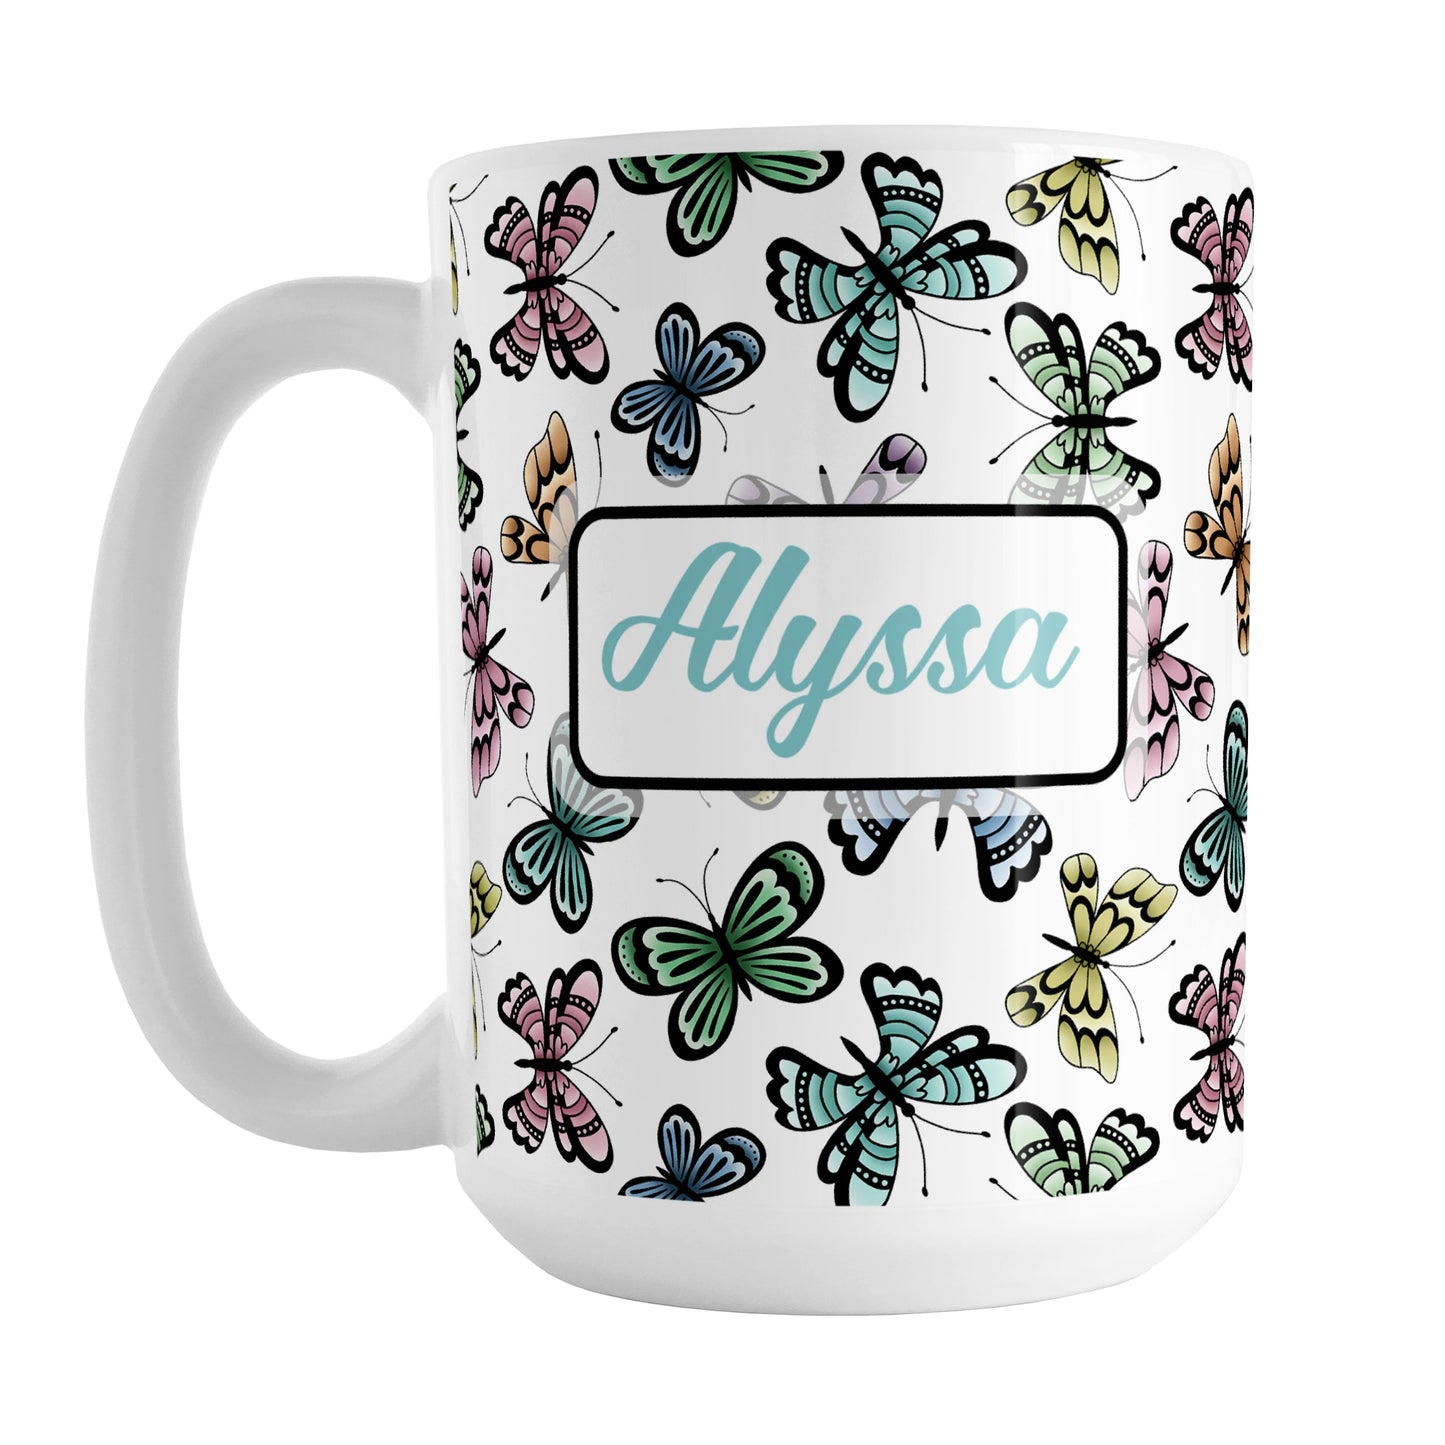 Personalized Pretty Butterfly Pattern Mug (15oz) at Amy's Coffee Mugs. A ceramic coffee mug designed with pretty and colorful butterflies in a pattern that wraps around the mug to the handle. Your name is personalized in turquoise on both sides of the mug. 